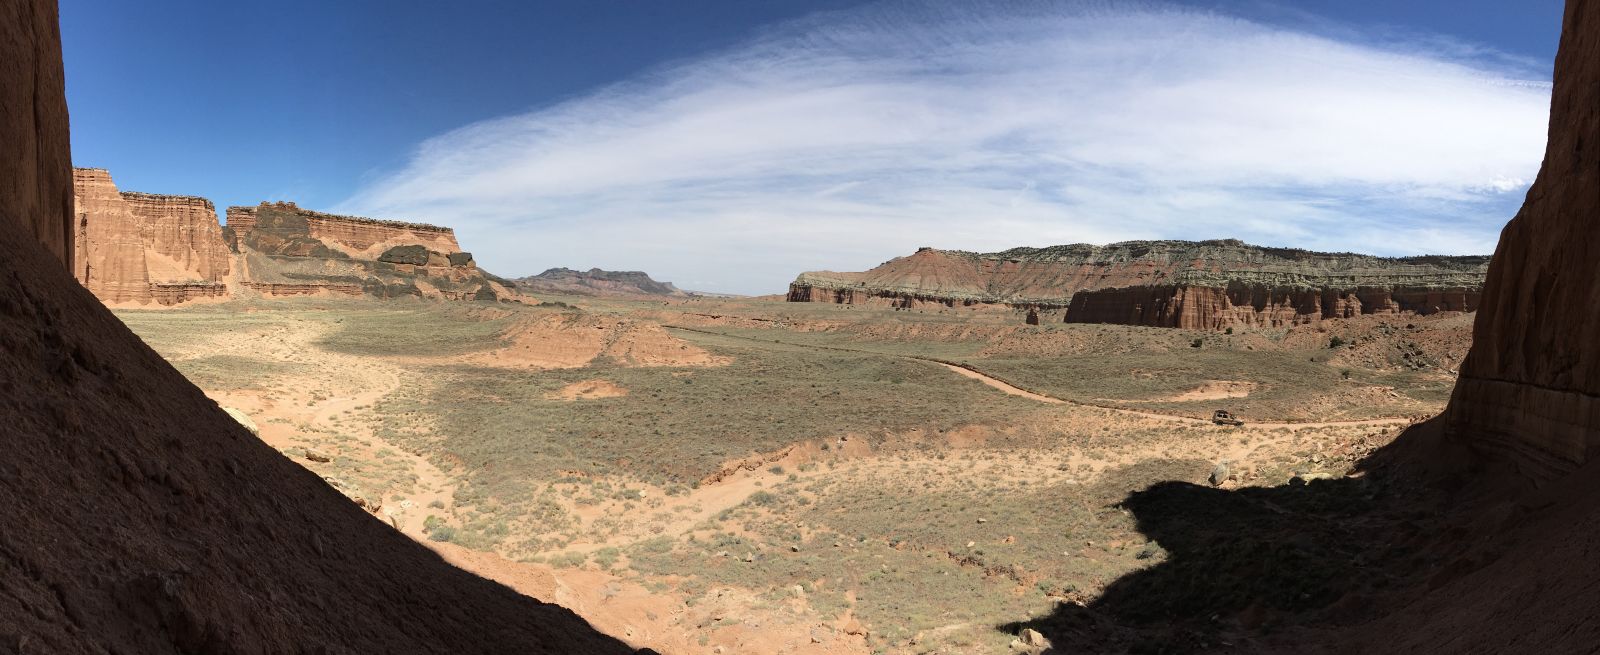 Pano - Cathedral Valley.